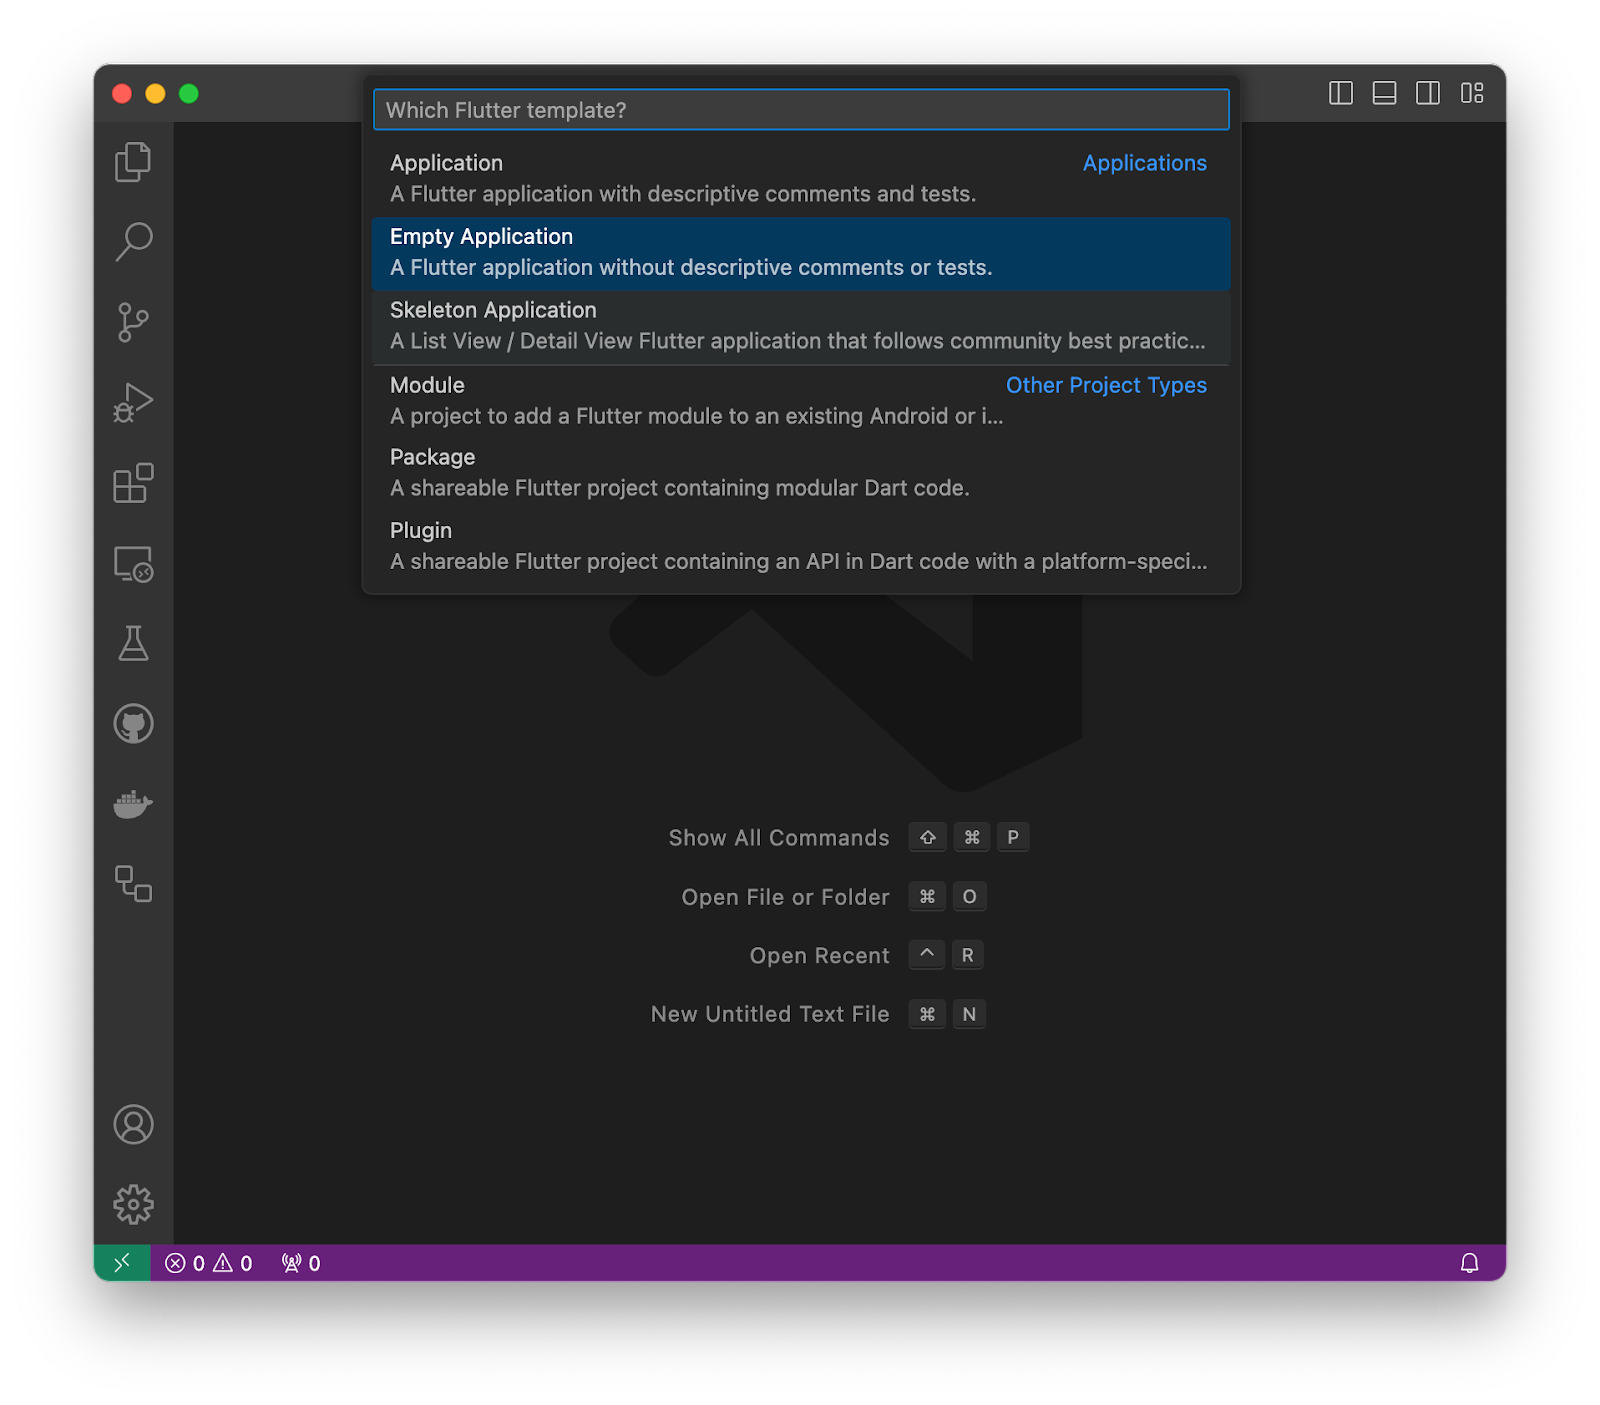 A screenshot of VS Code with Empty Application shown as selected as part of the new application flow